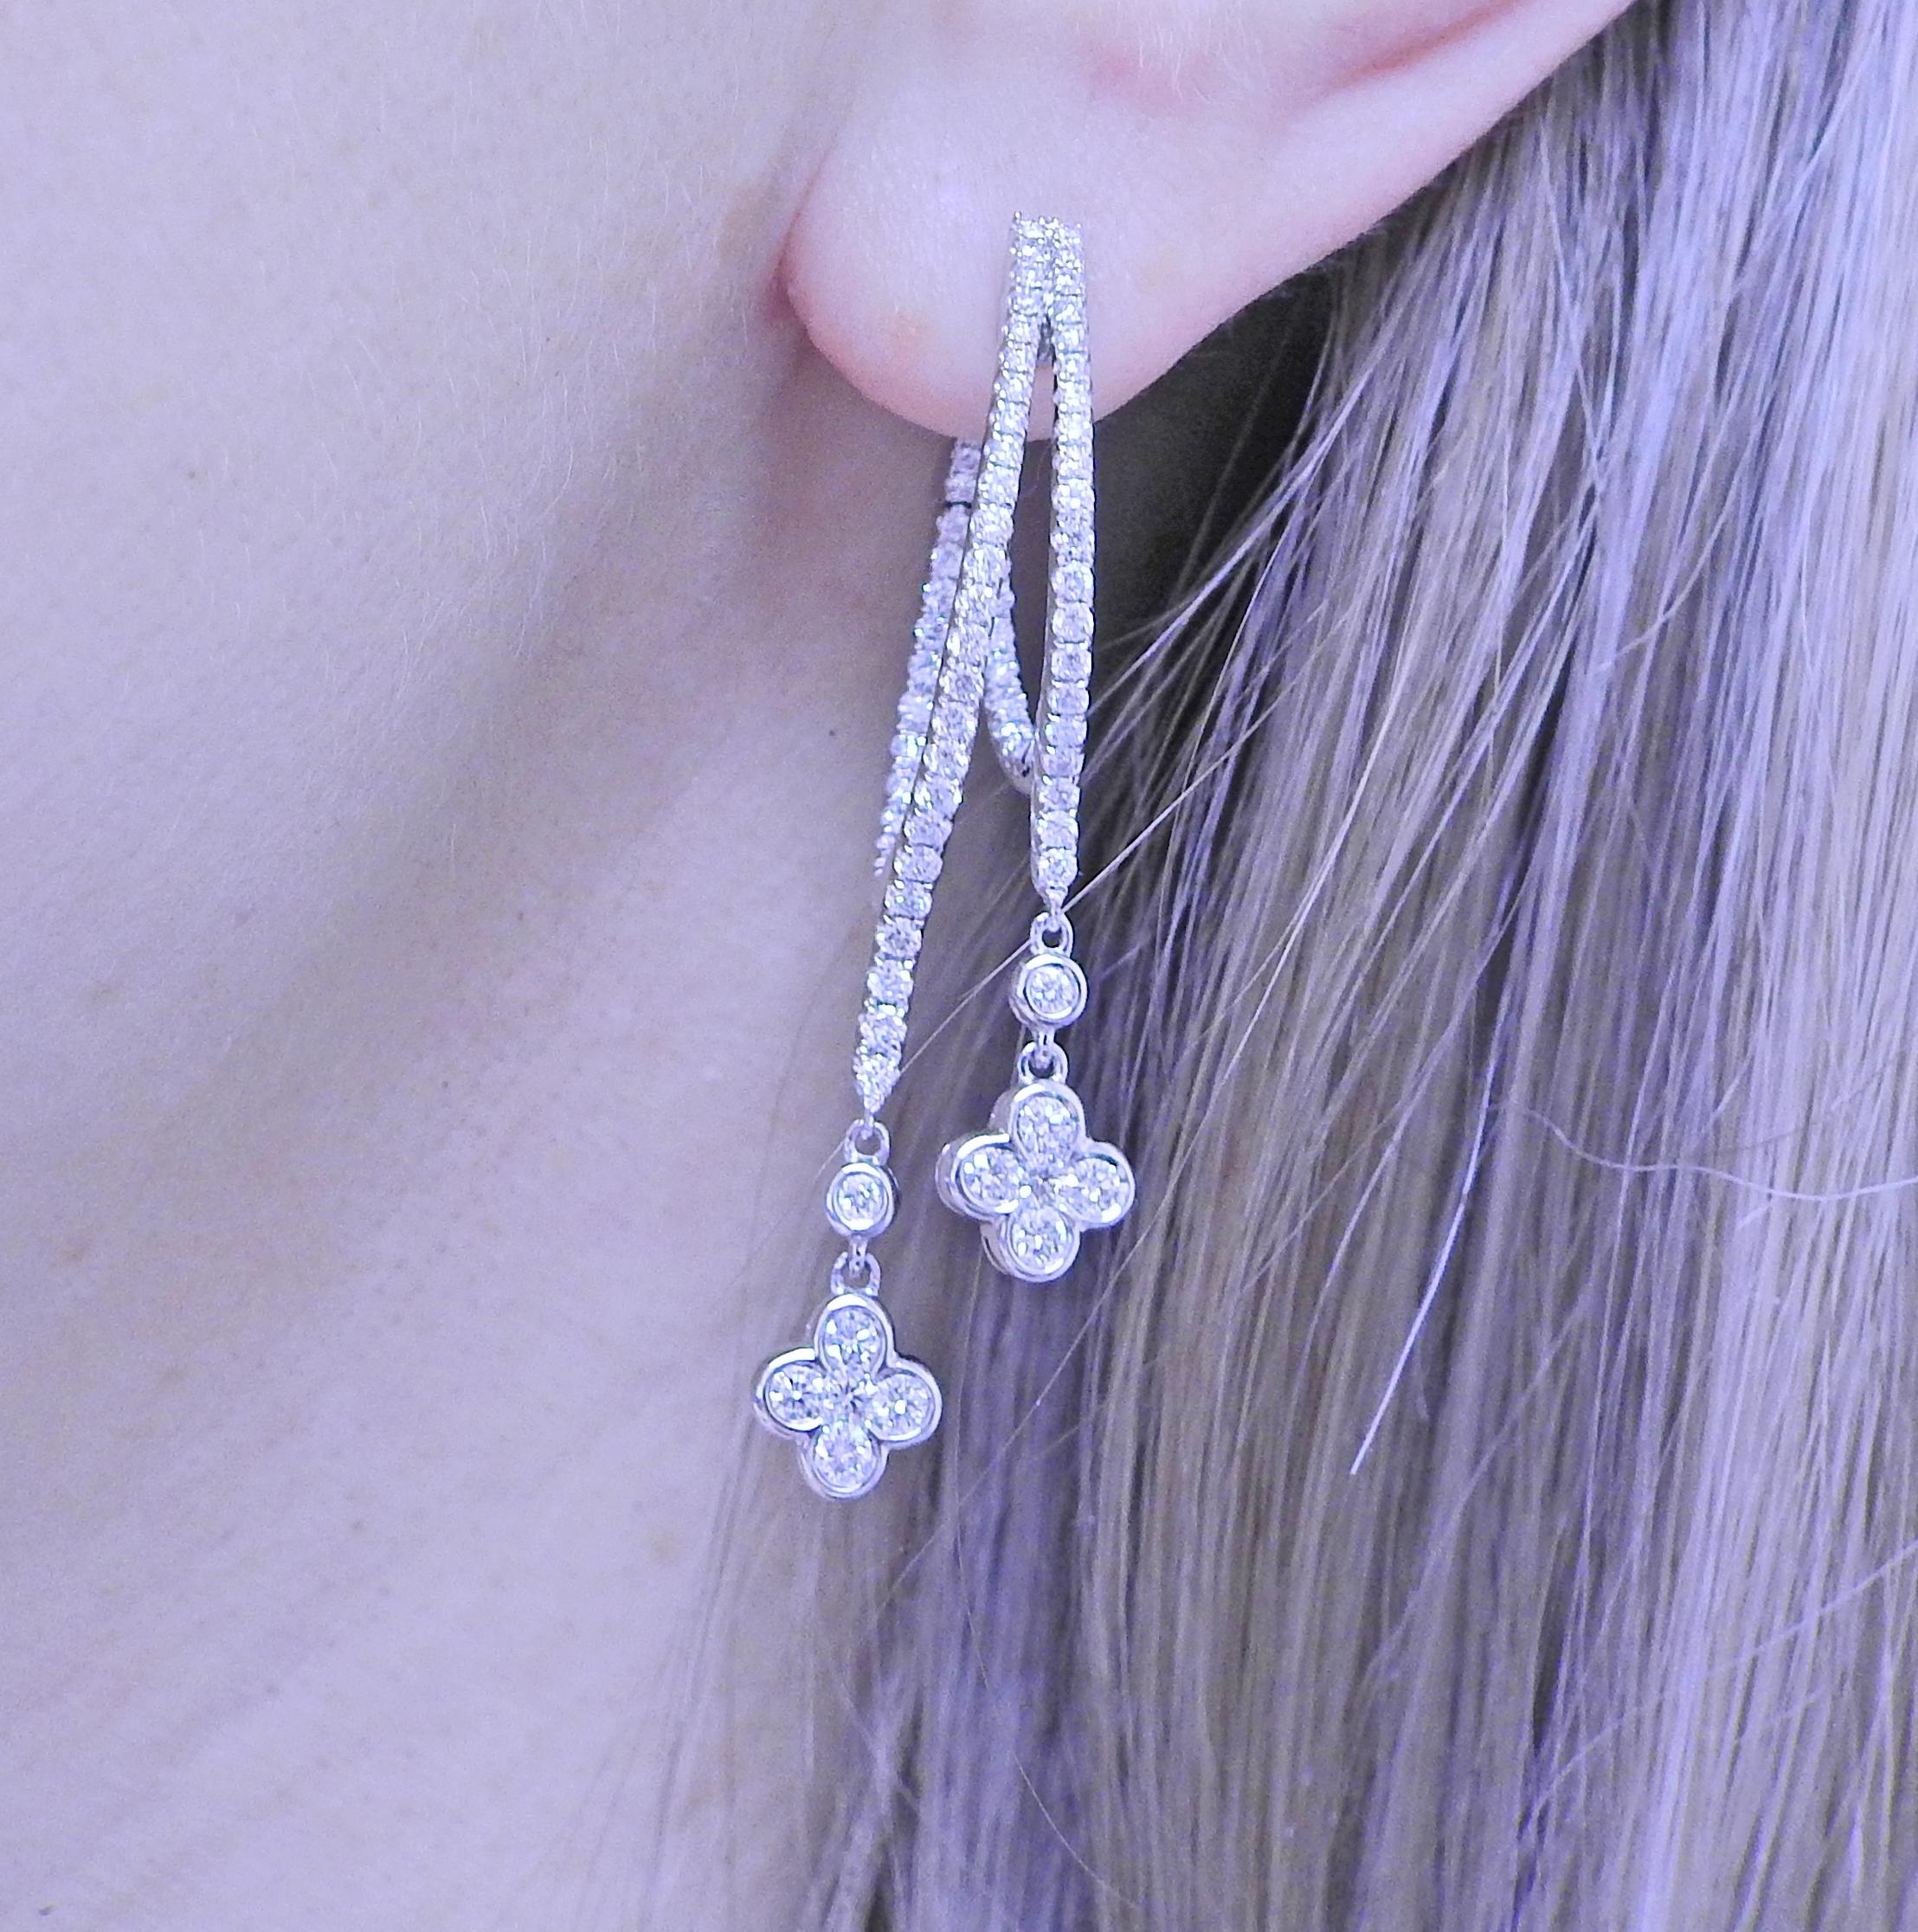 Pair of 18k white gold drop earrings by Roberto Coin, set with 2.00ctw in G/VS diamonds. Earring measure 50mm (2